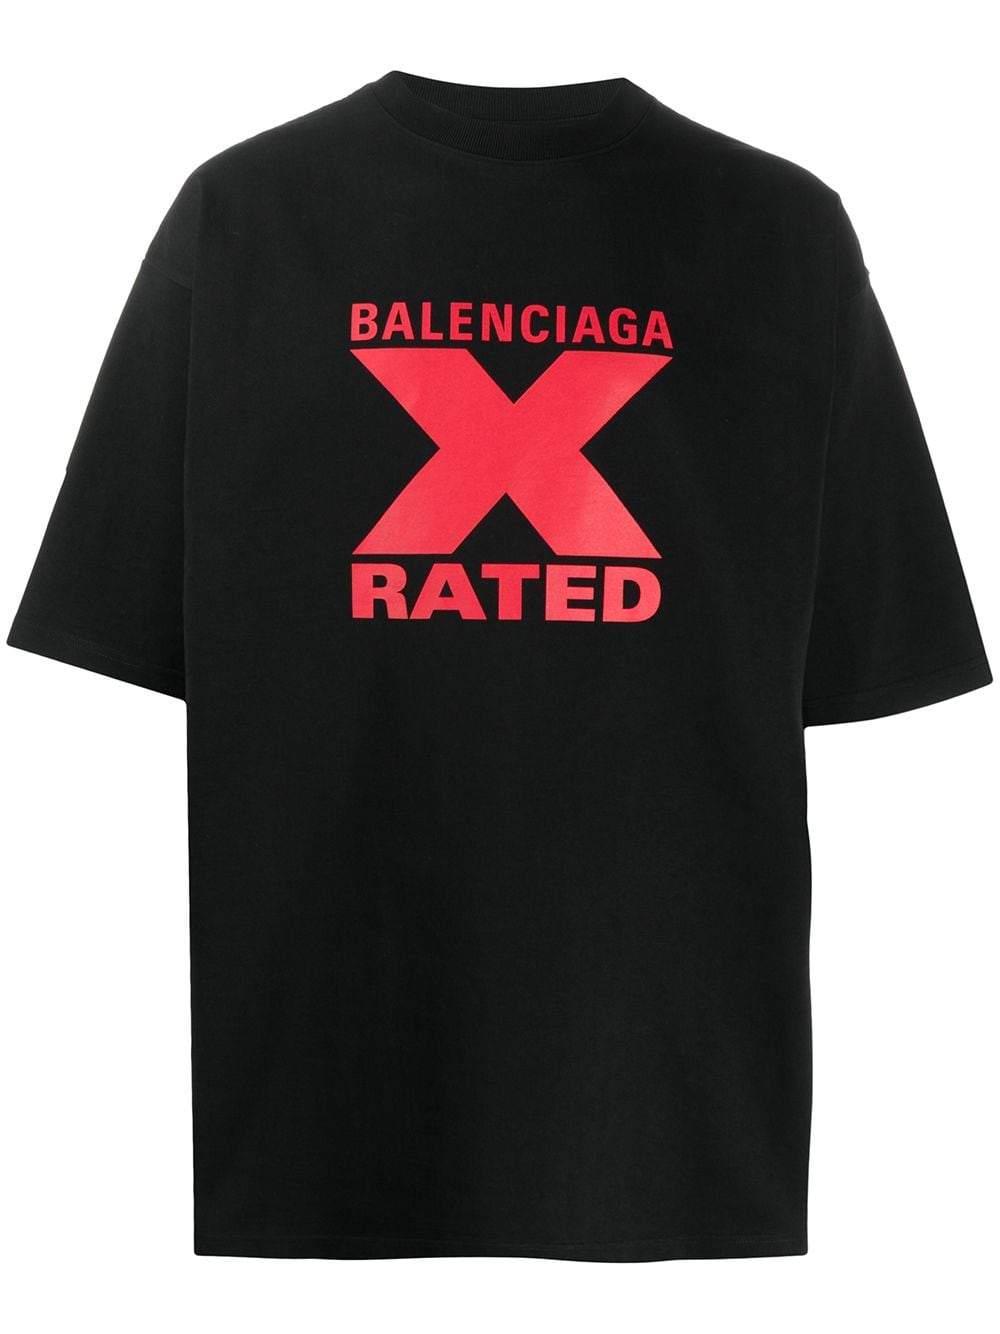 Balenciaga Cotton X Rated T-shirt Black/red for Men - Lyst